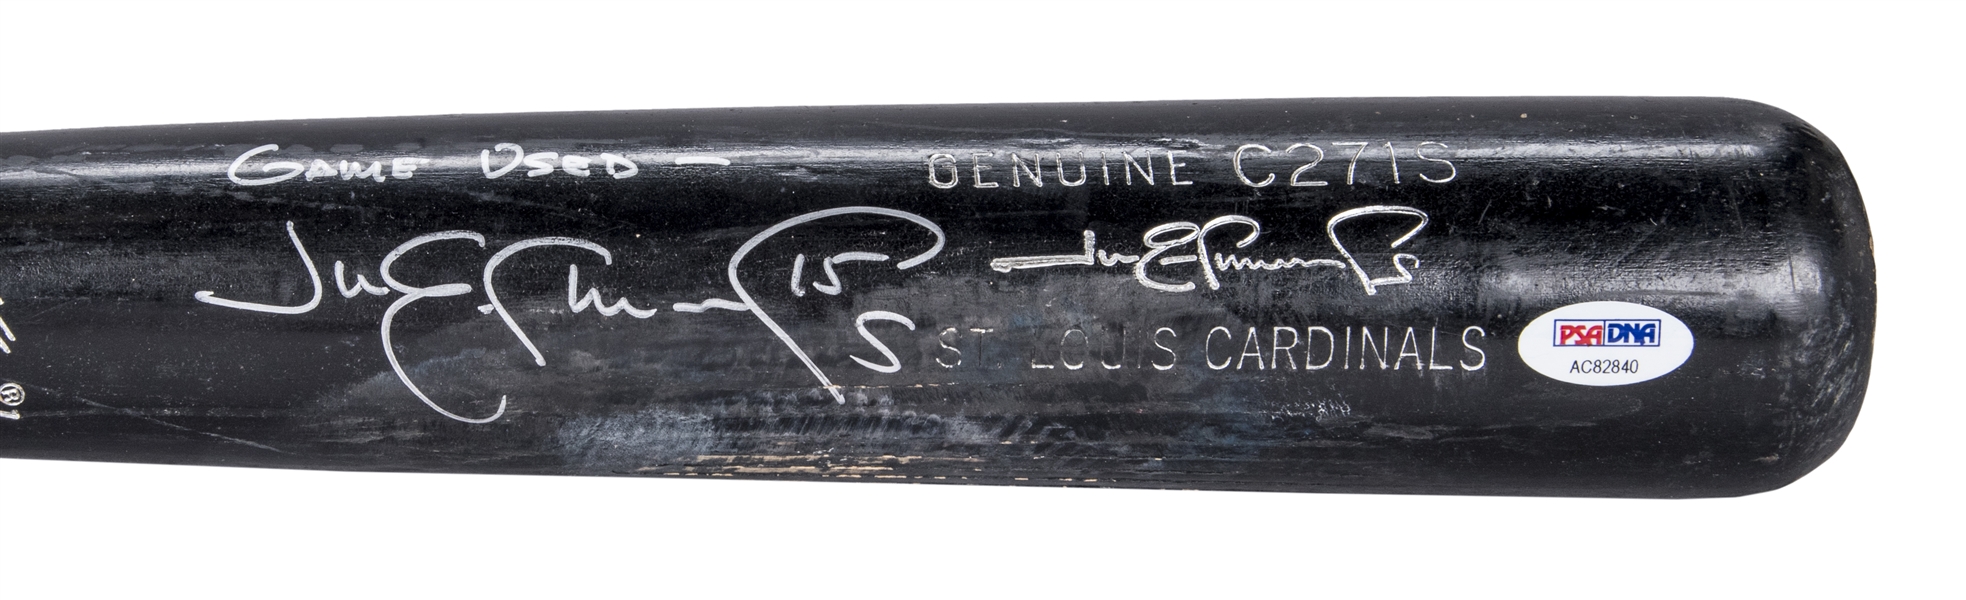 Jim Edmonds Autographed Baseball Bat Including Three 8 x 10 Photograph  and Bat in a 20 x 37 Deluxe Frame Shadow Box